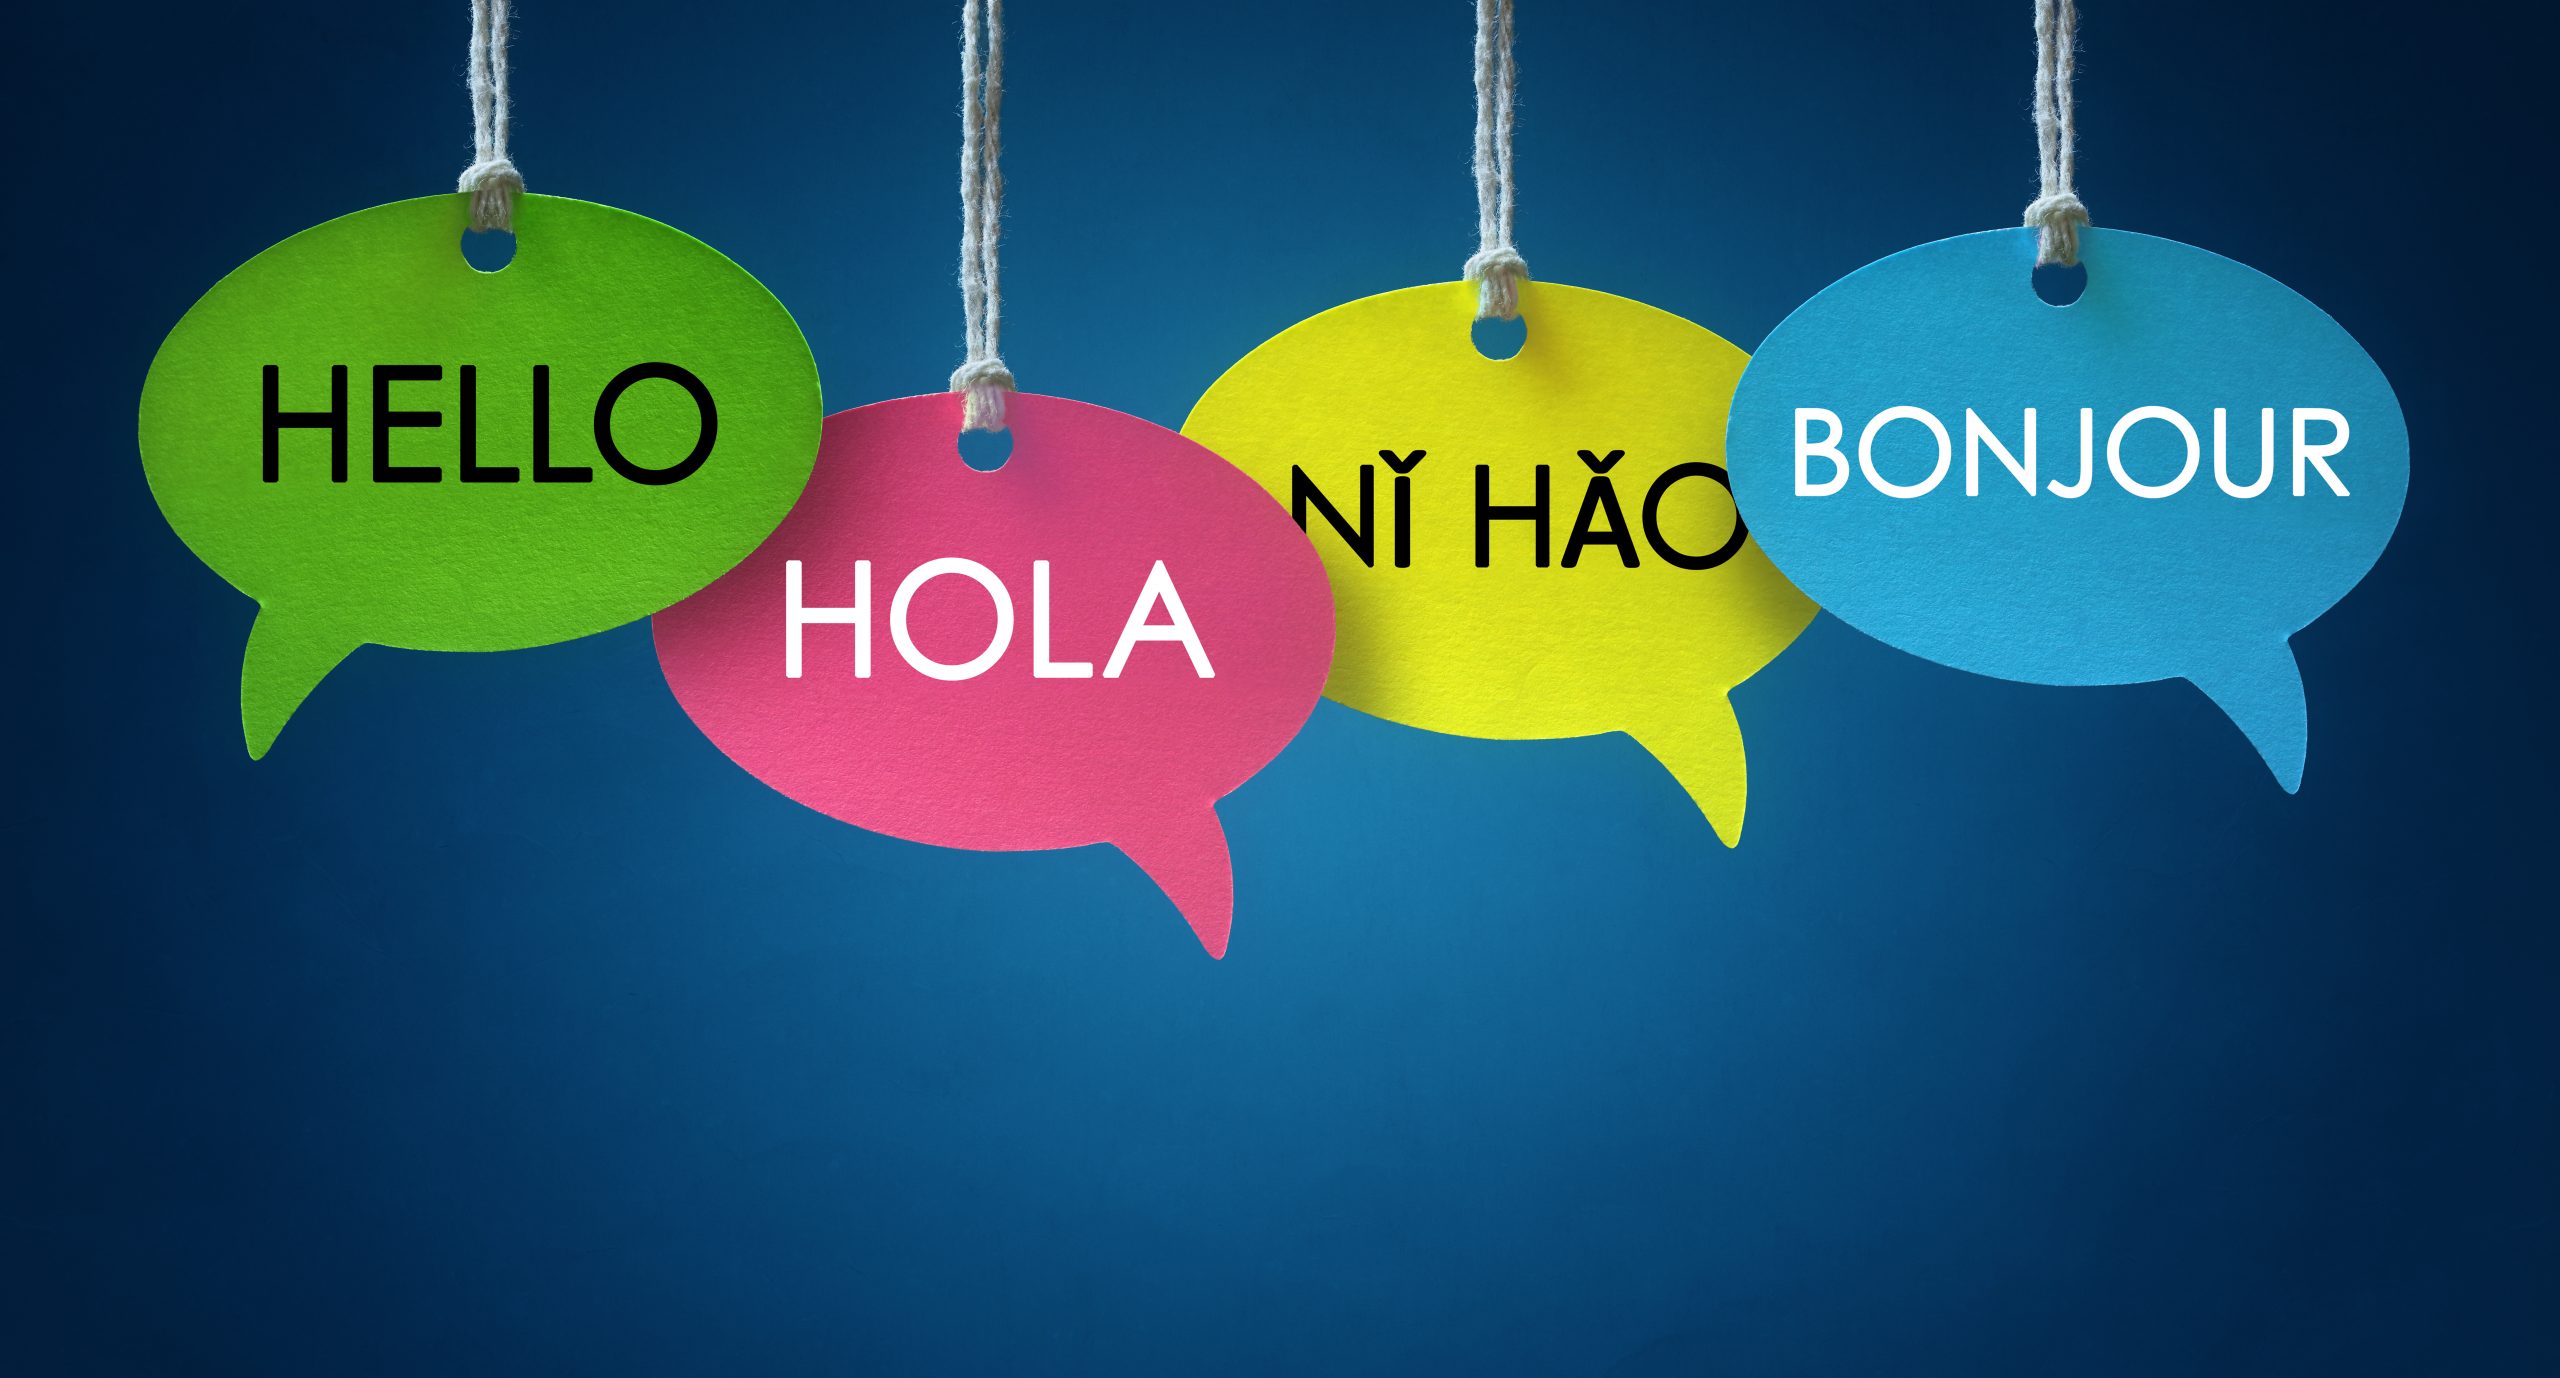 Foreign language colorful communication speech bubbles hanging from a cord over blue background